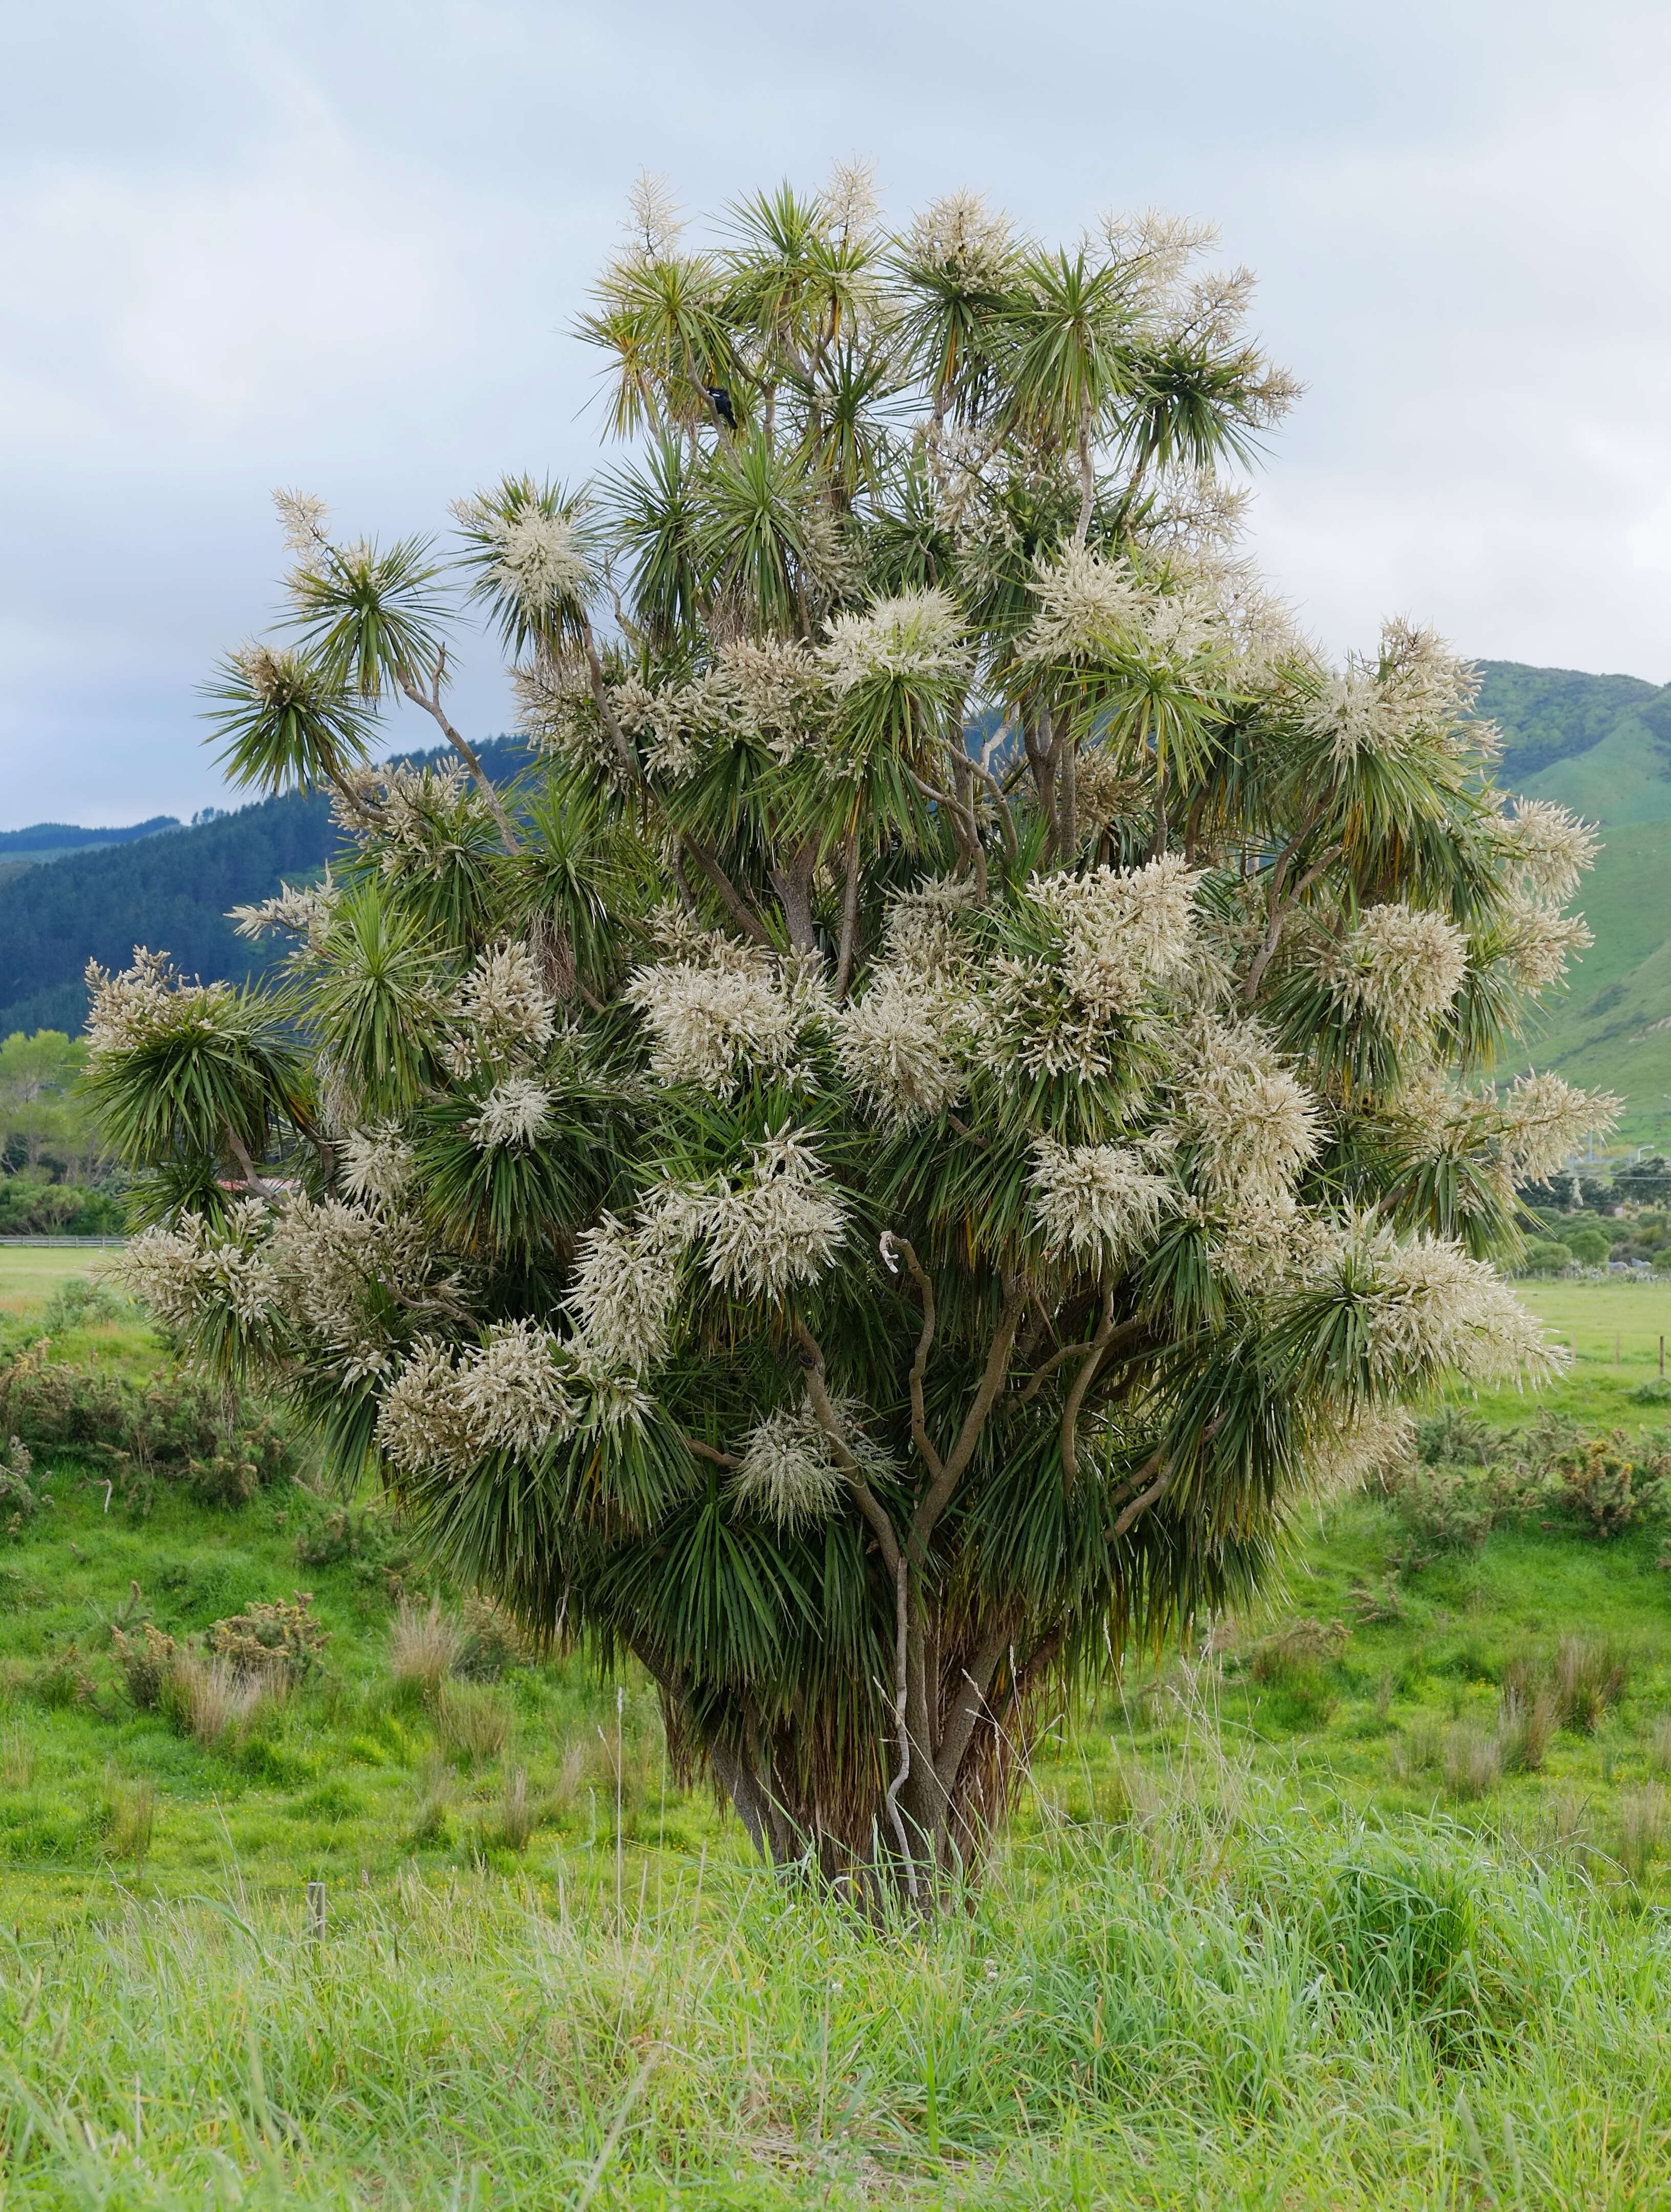 Image of cabbage tree